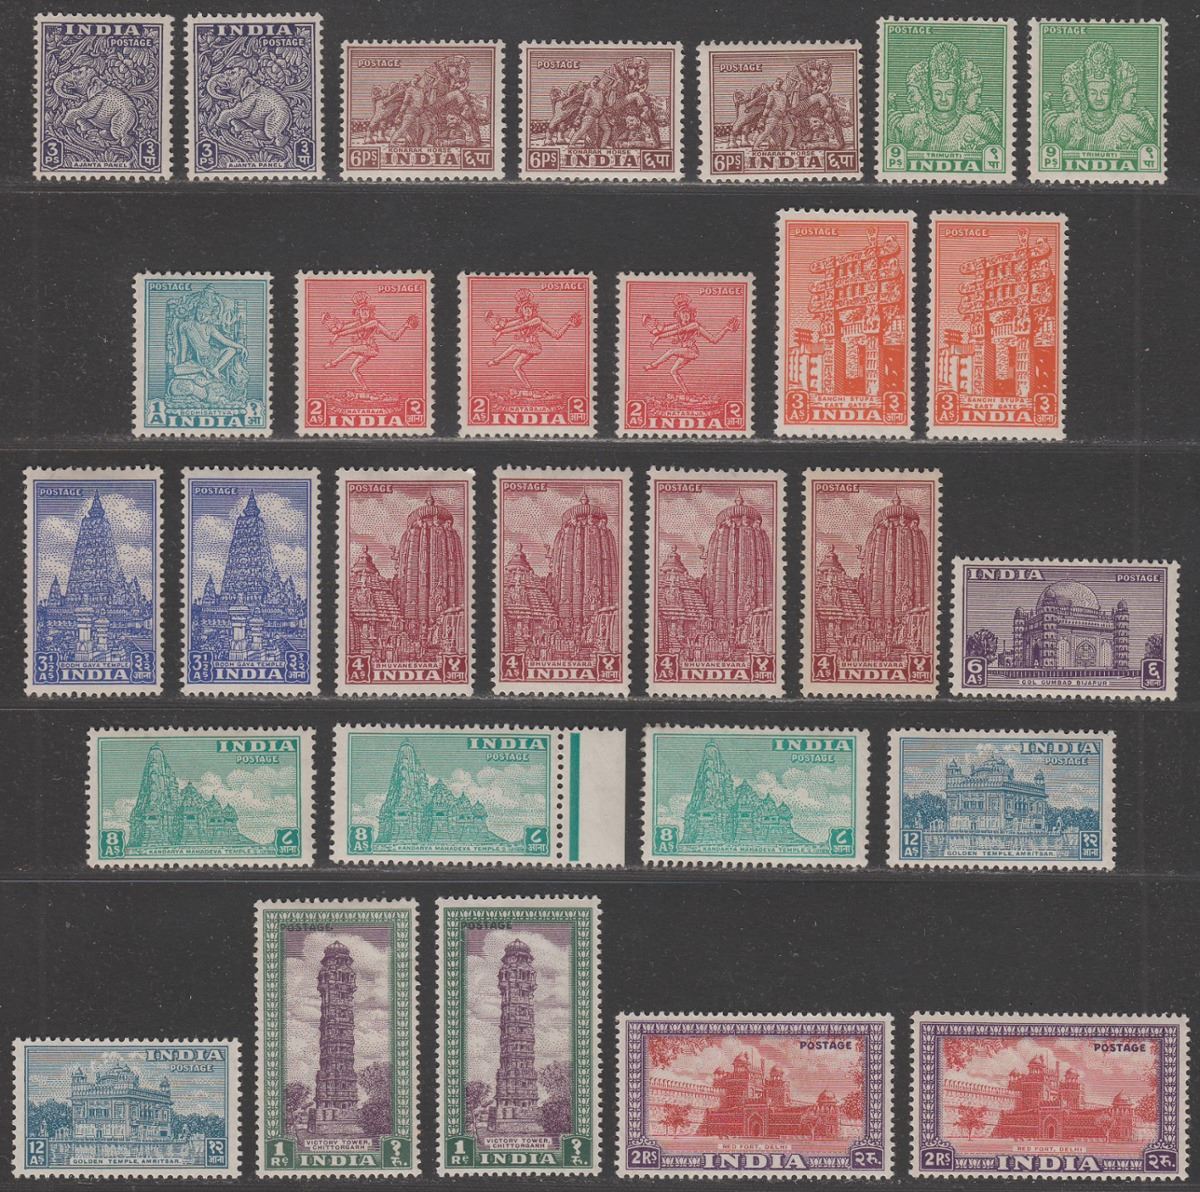 India 1949 Archaeology Set to 2r with Shades Mint SG309-321